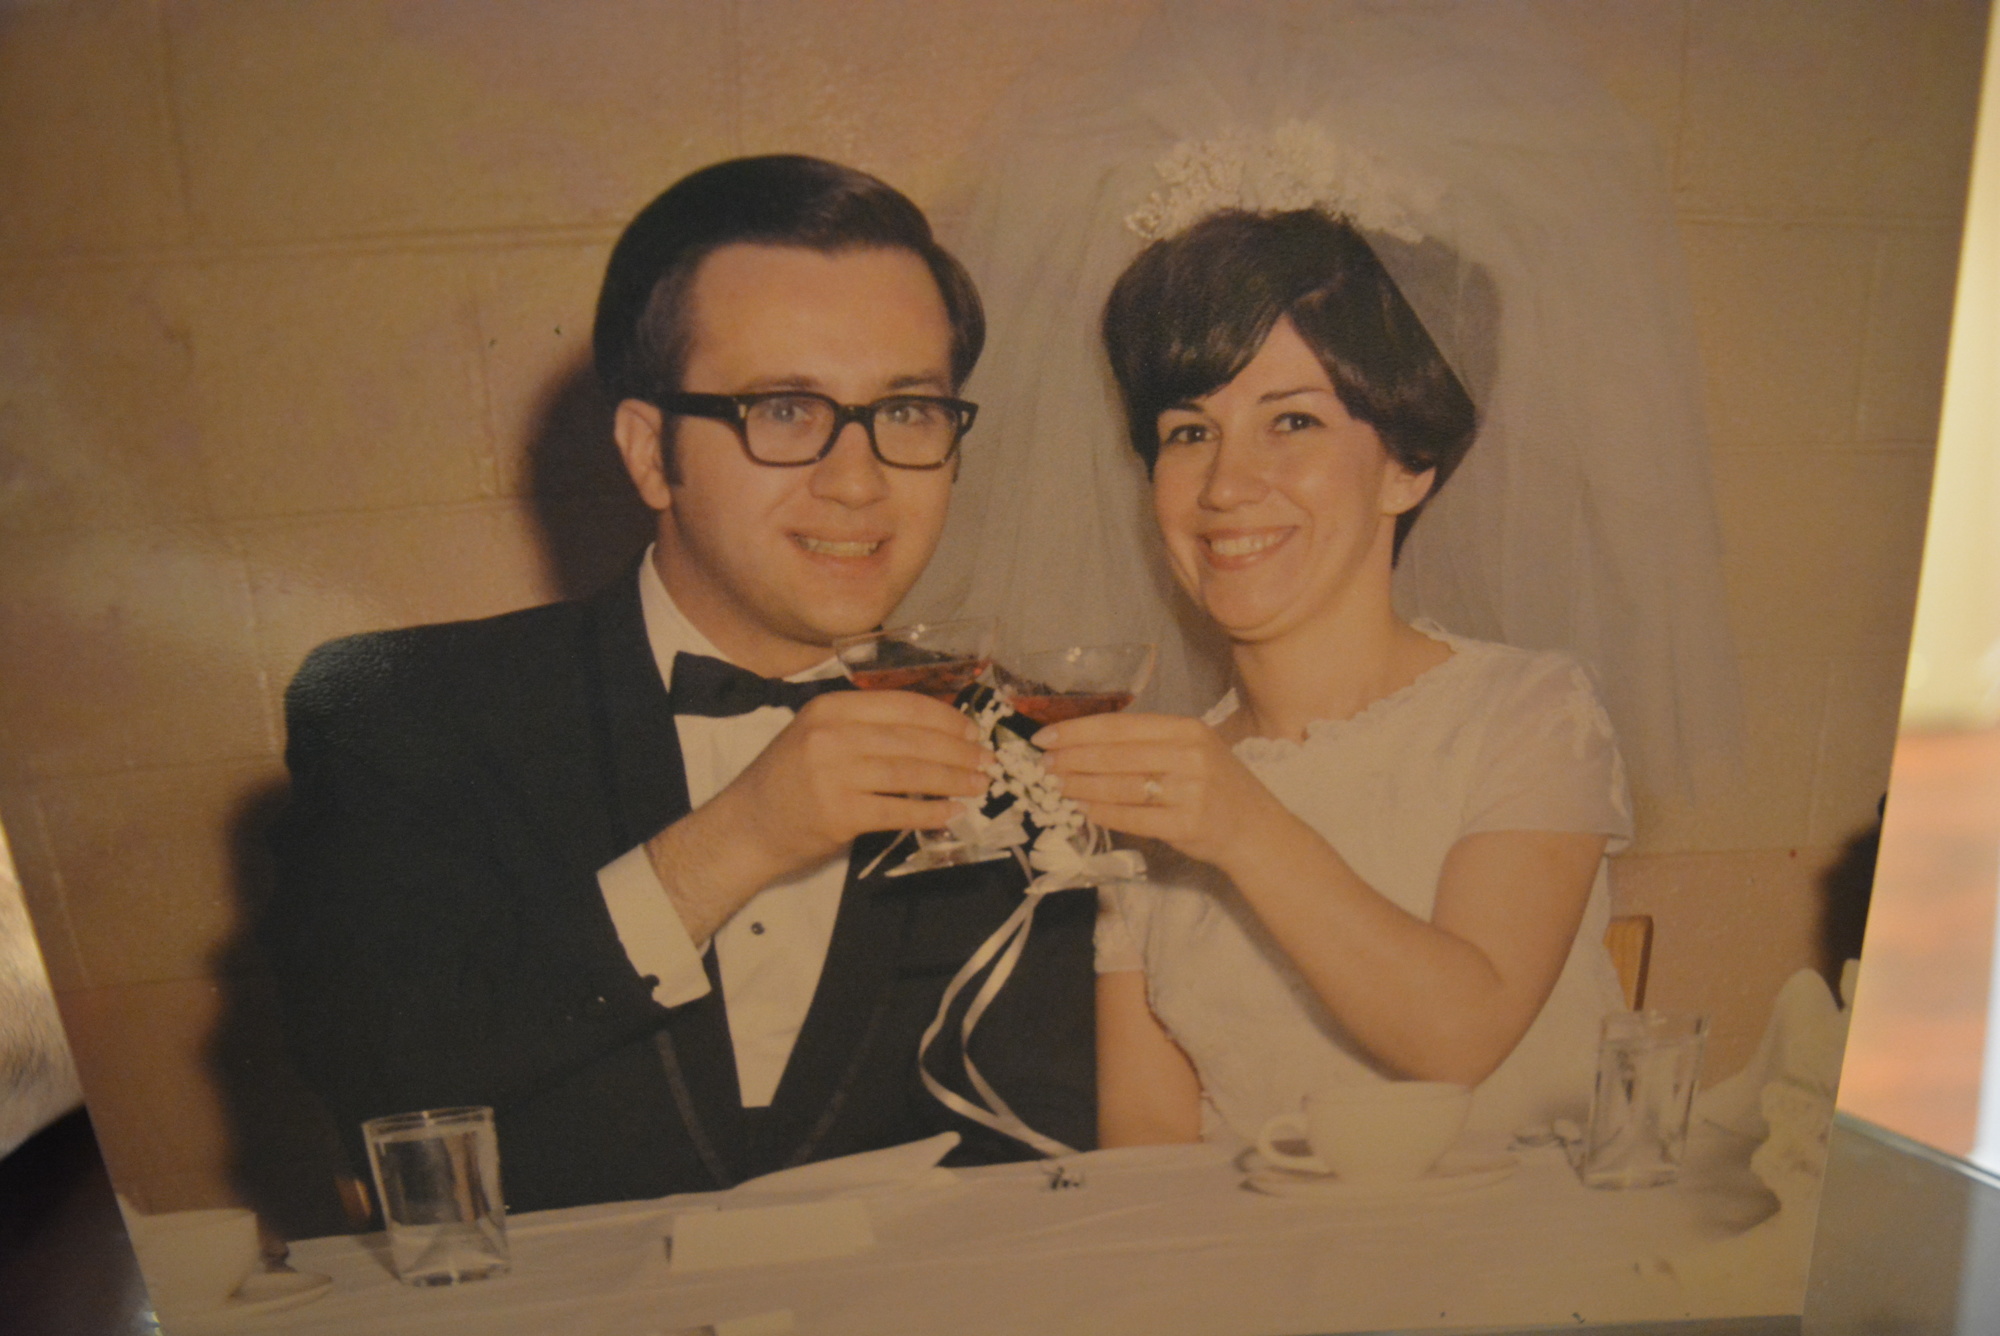 John and Margie Polites married on a Sunday when Greek businesses were closed in their hometown in Dayton, Ohio. They married Feb. 2, 1969.